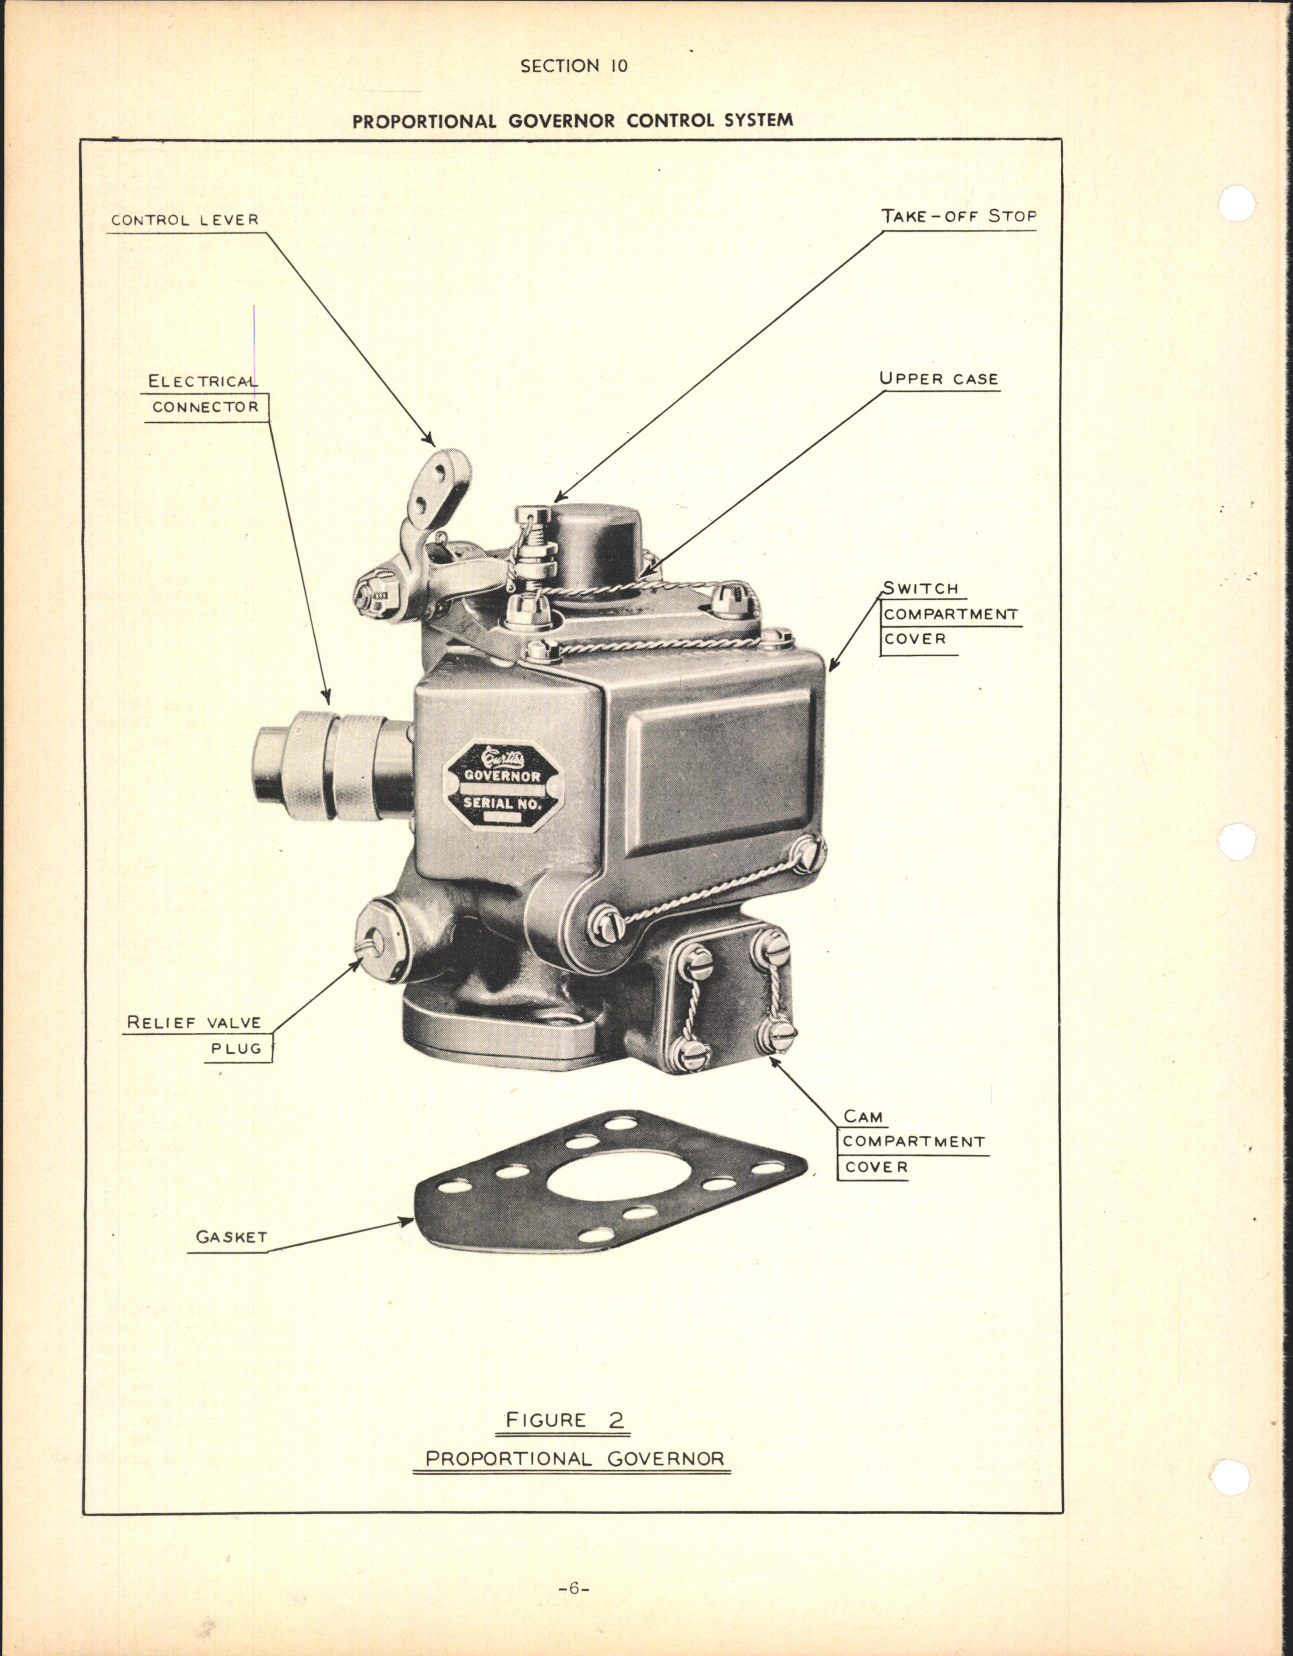 Sample page 8 from AirCorps Library document: Section 10 - Proportional Governor Control System